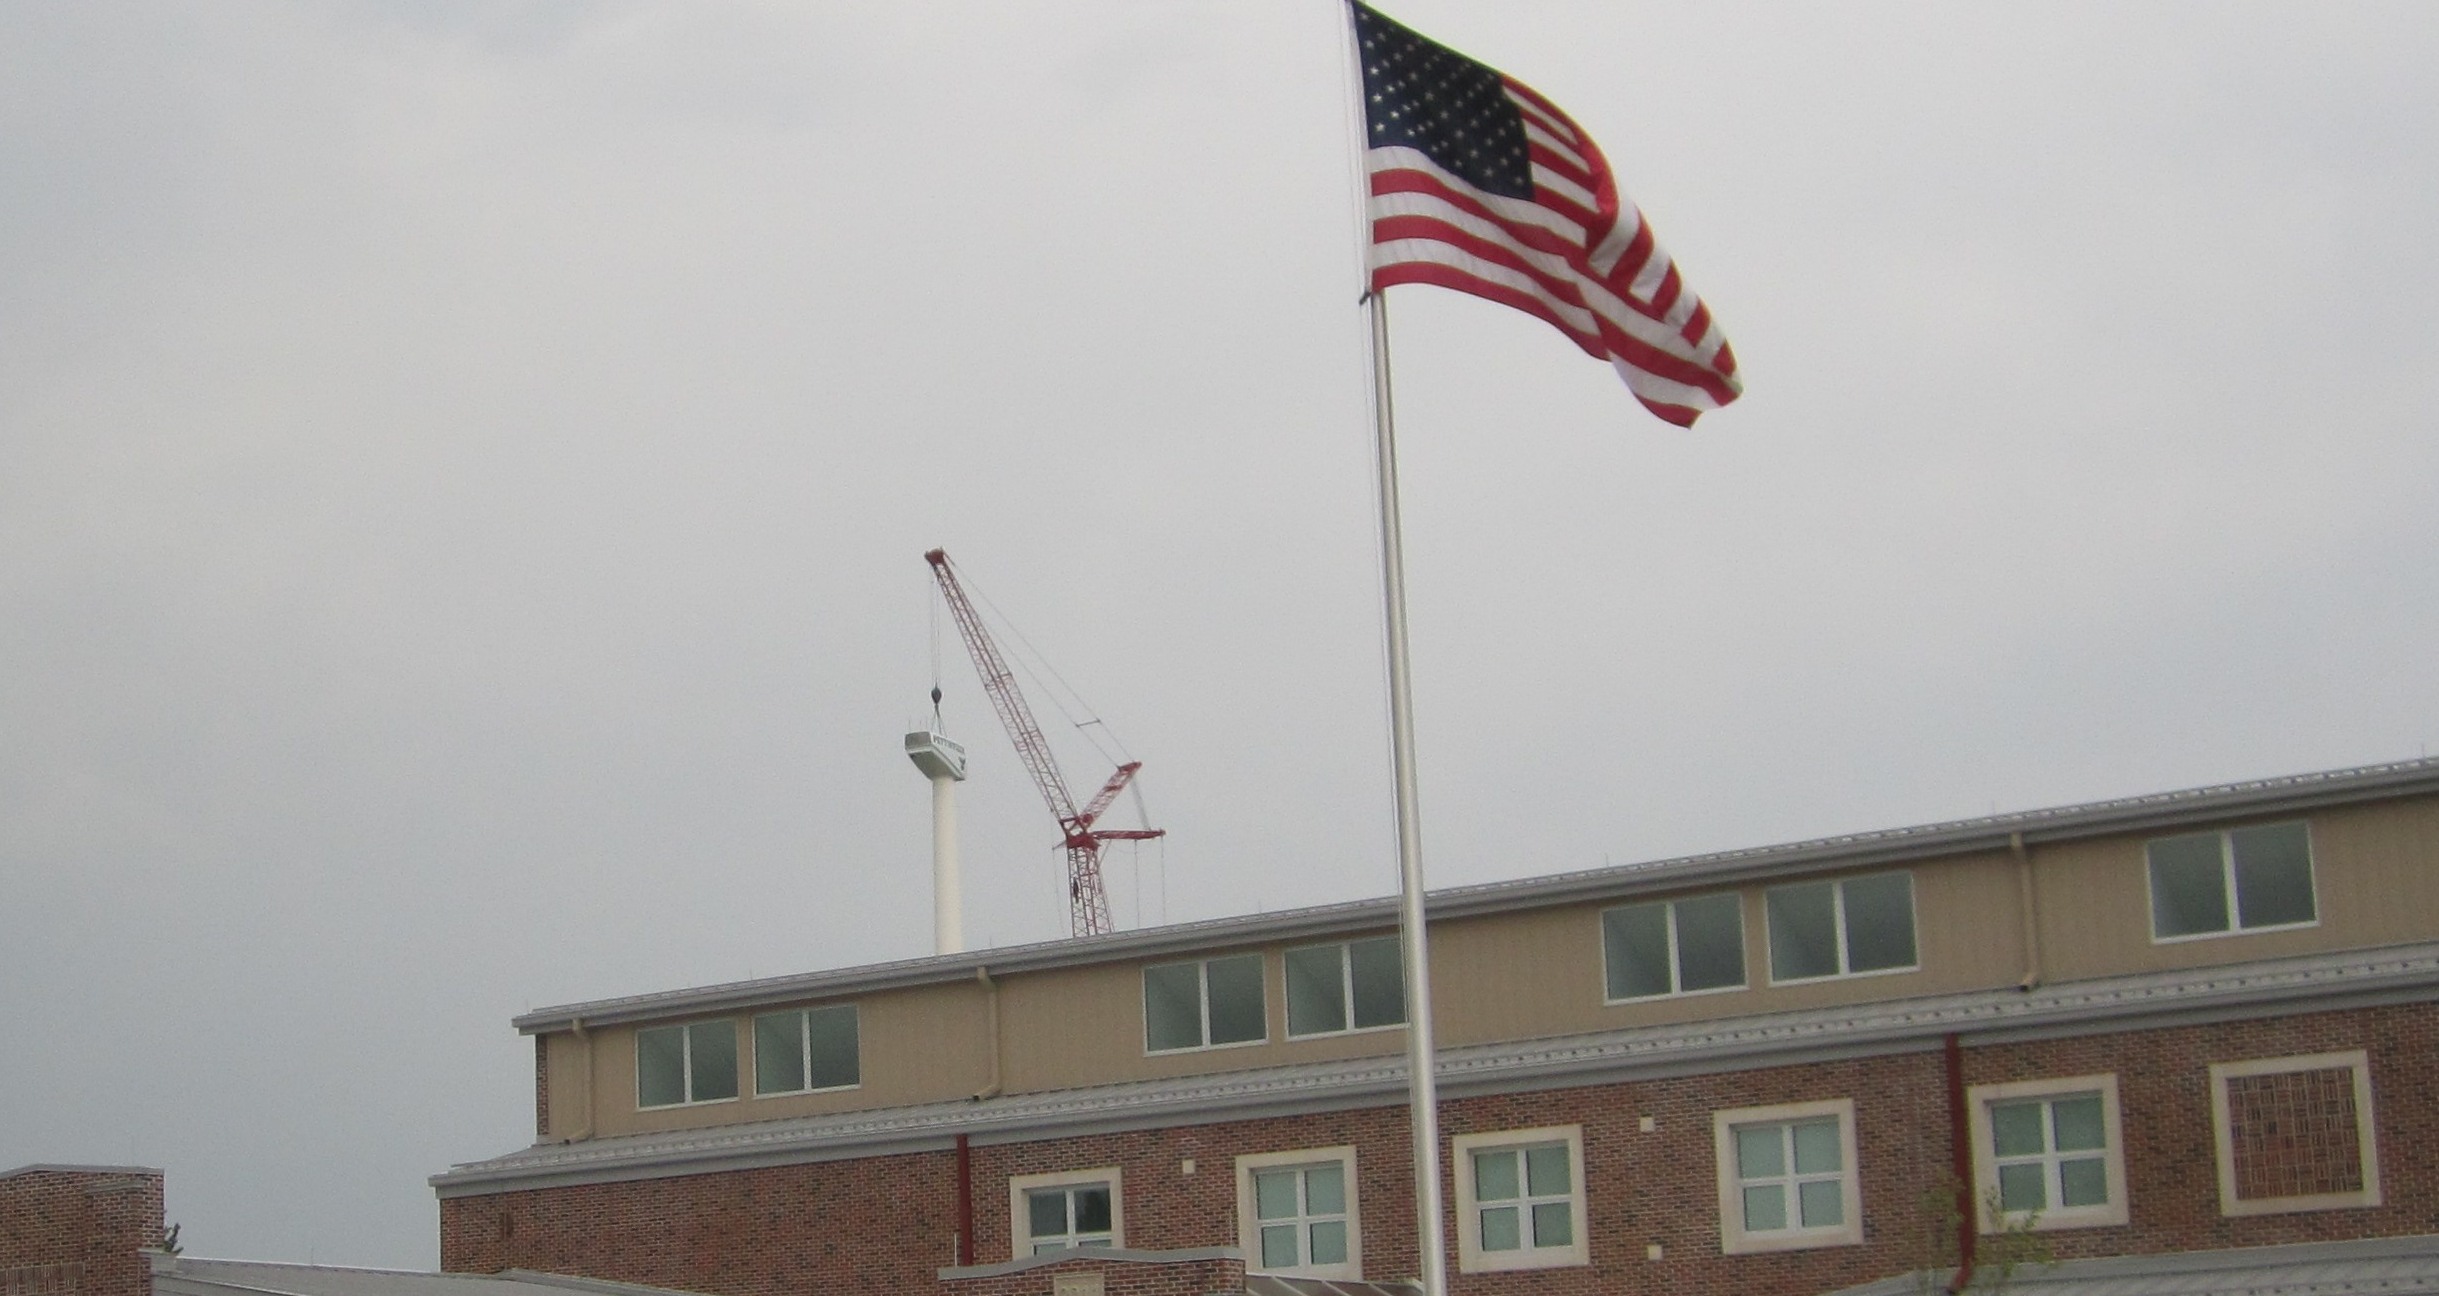 A picture of the side of the school with the flag pole in the front being the main focus